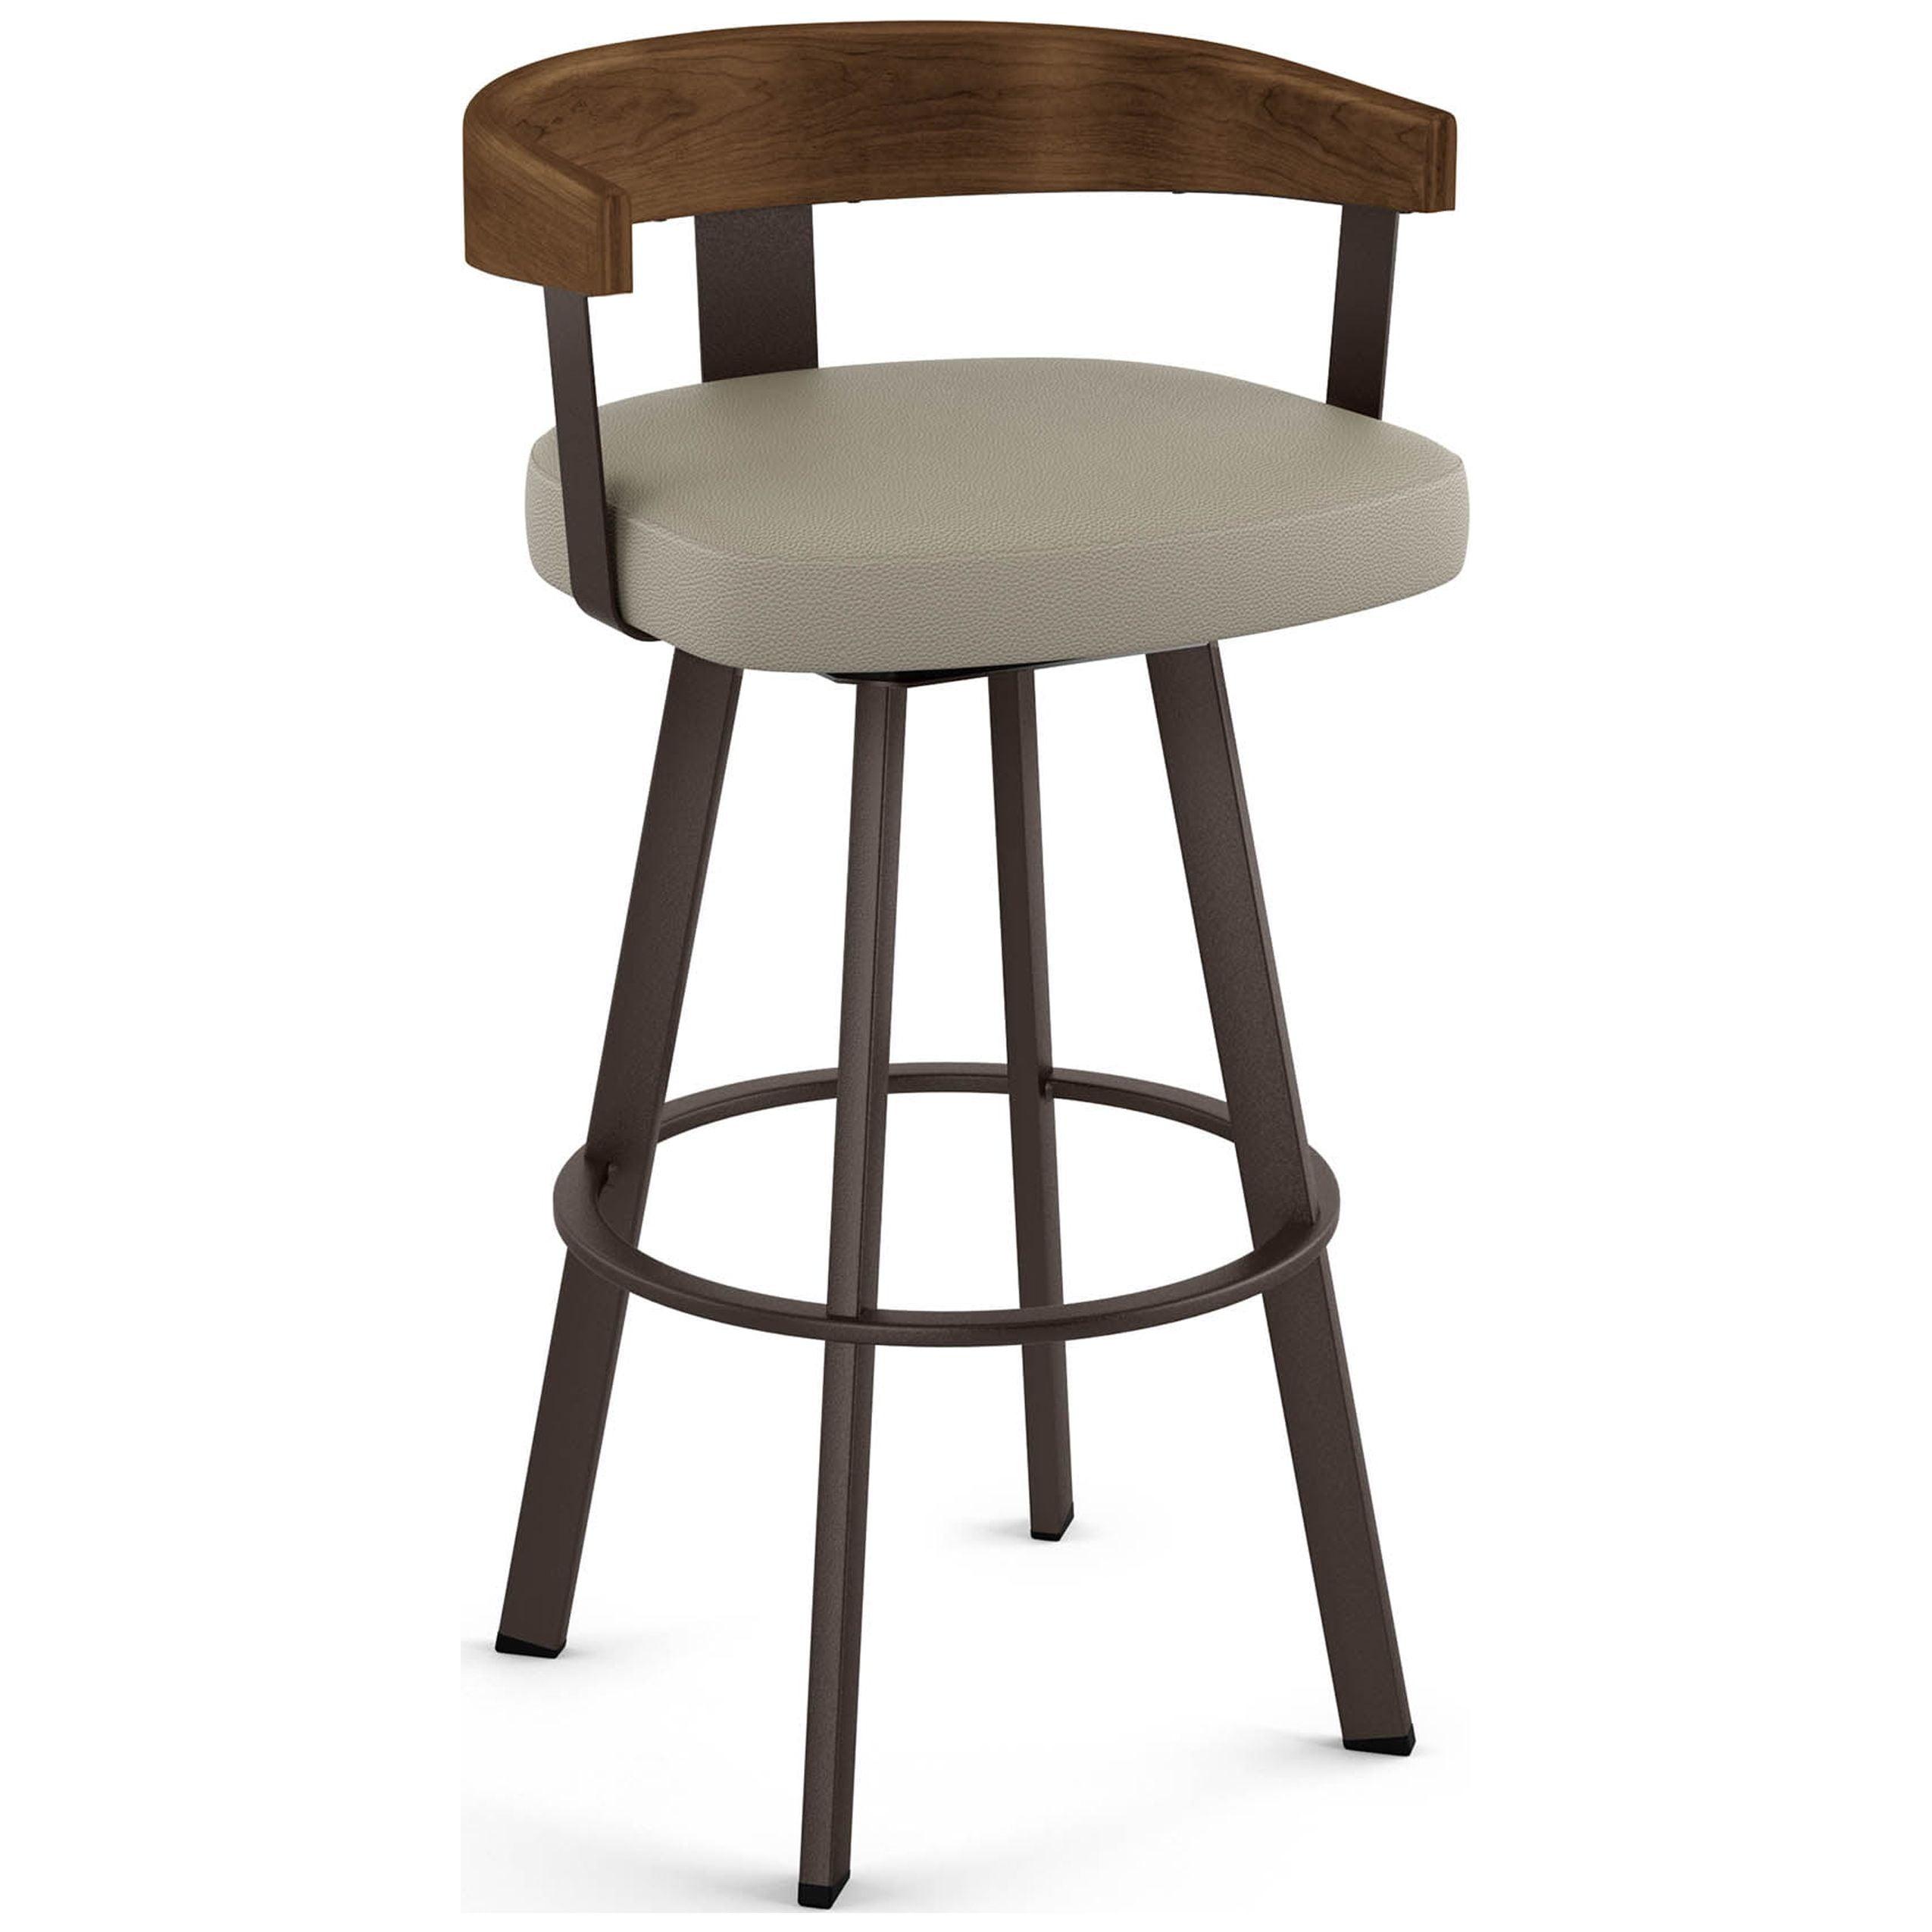 Lars 30" Swivel Bar Stool in Greige Faux Leather with Wood and Metal Frame